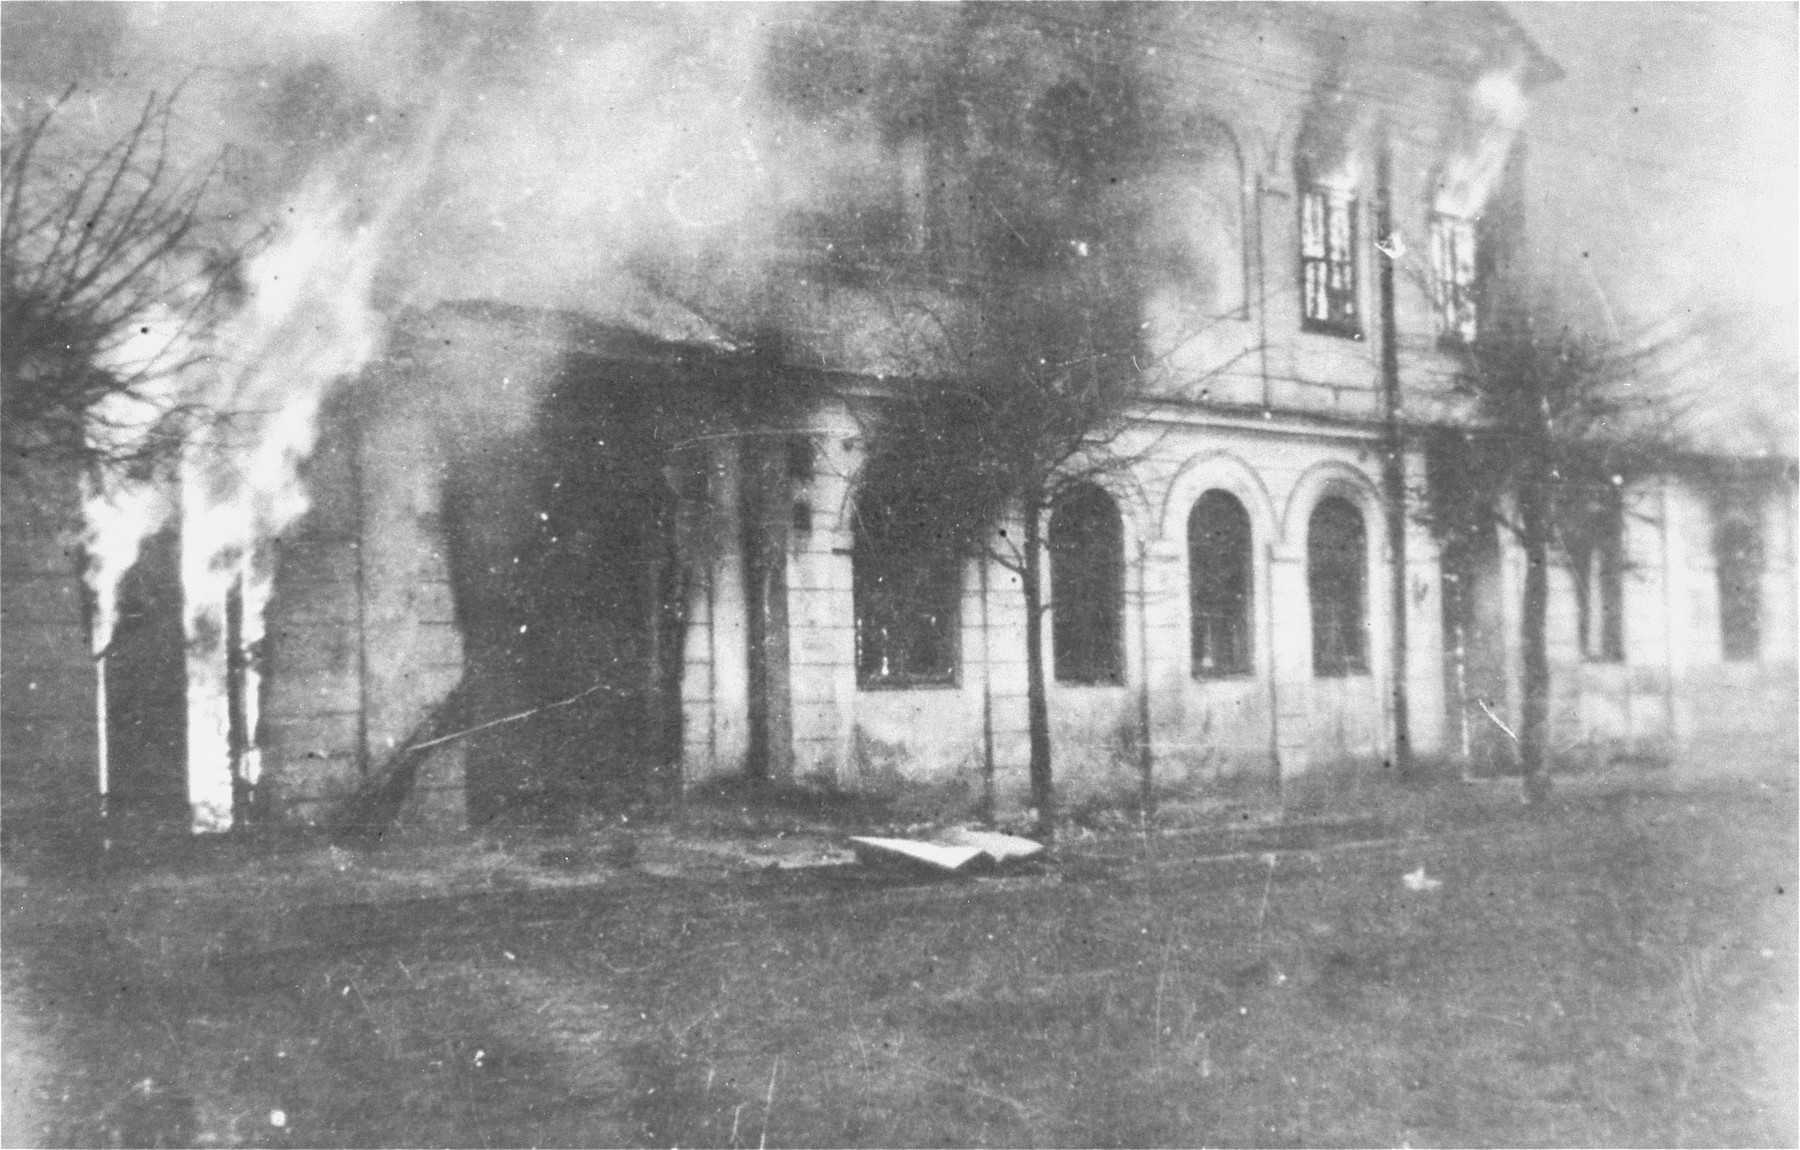 View of a burning synagogue in Siedlce.